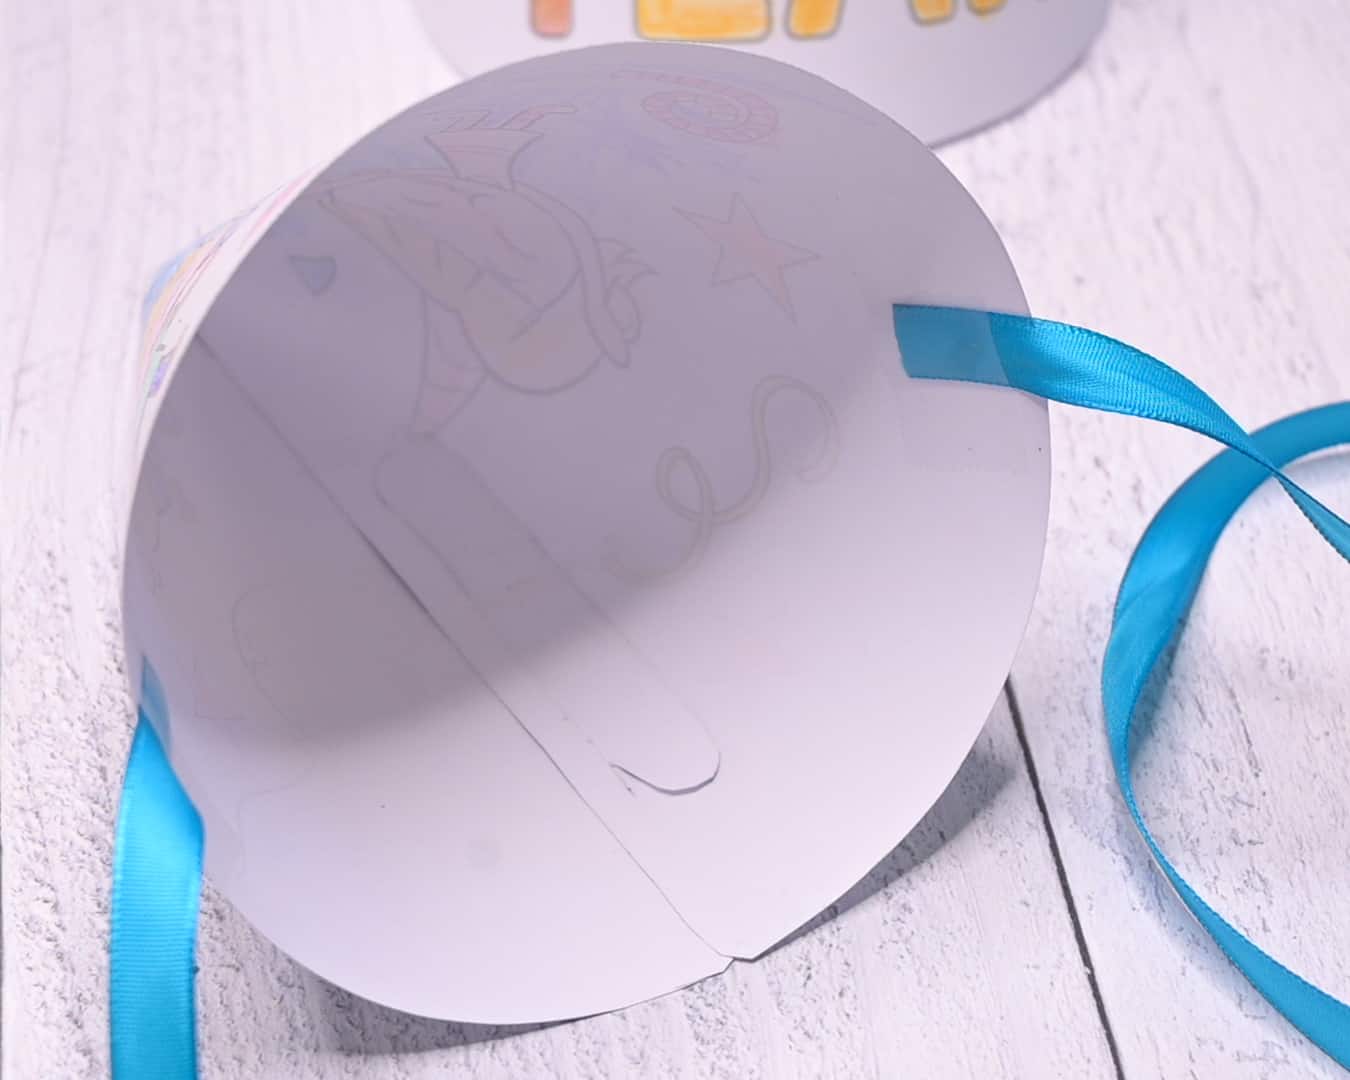 The inside of a printable party hat with blue ribbons taped to hold the hat in place